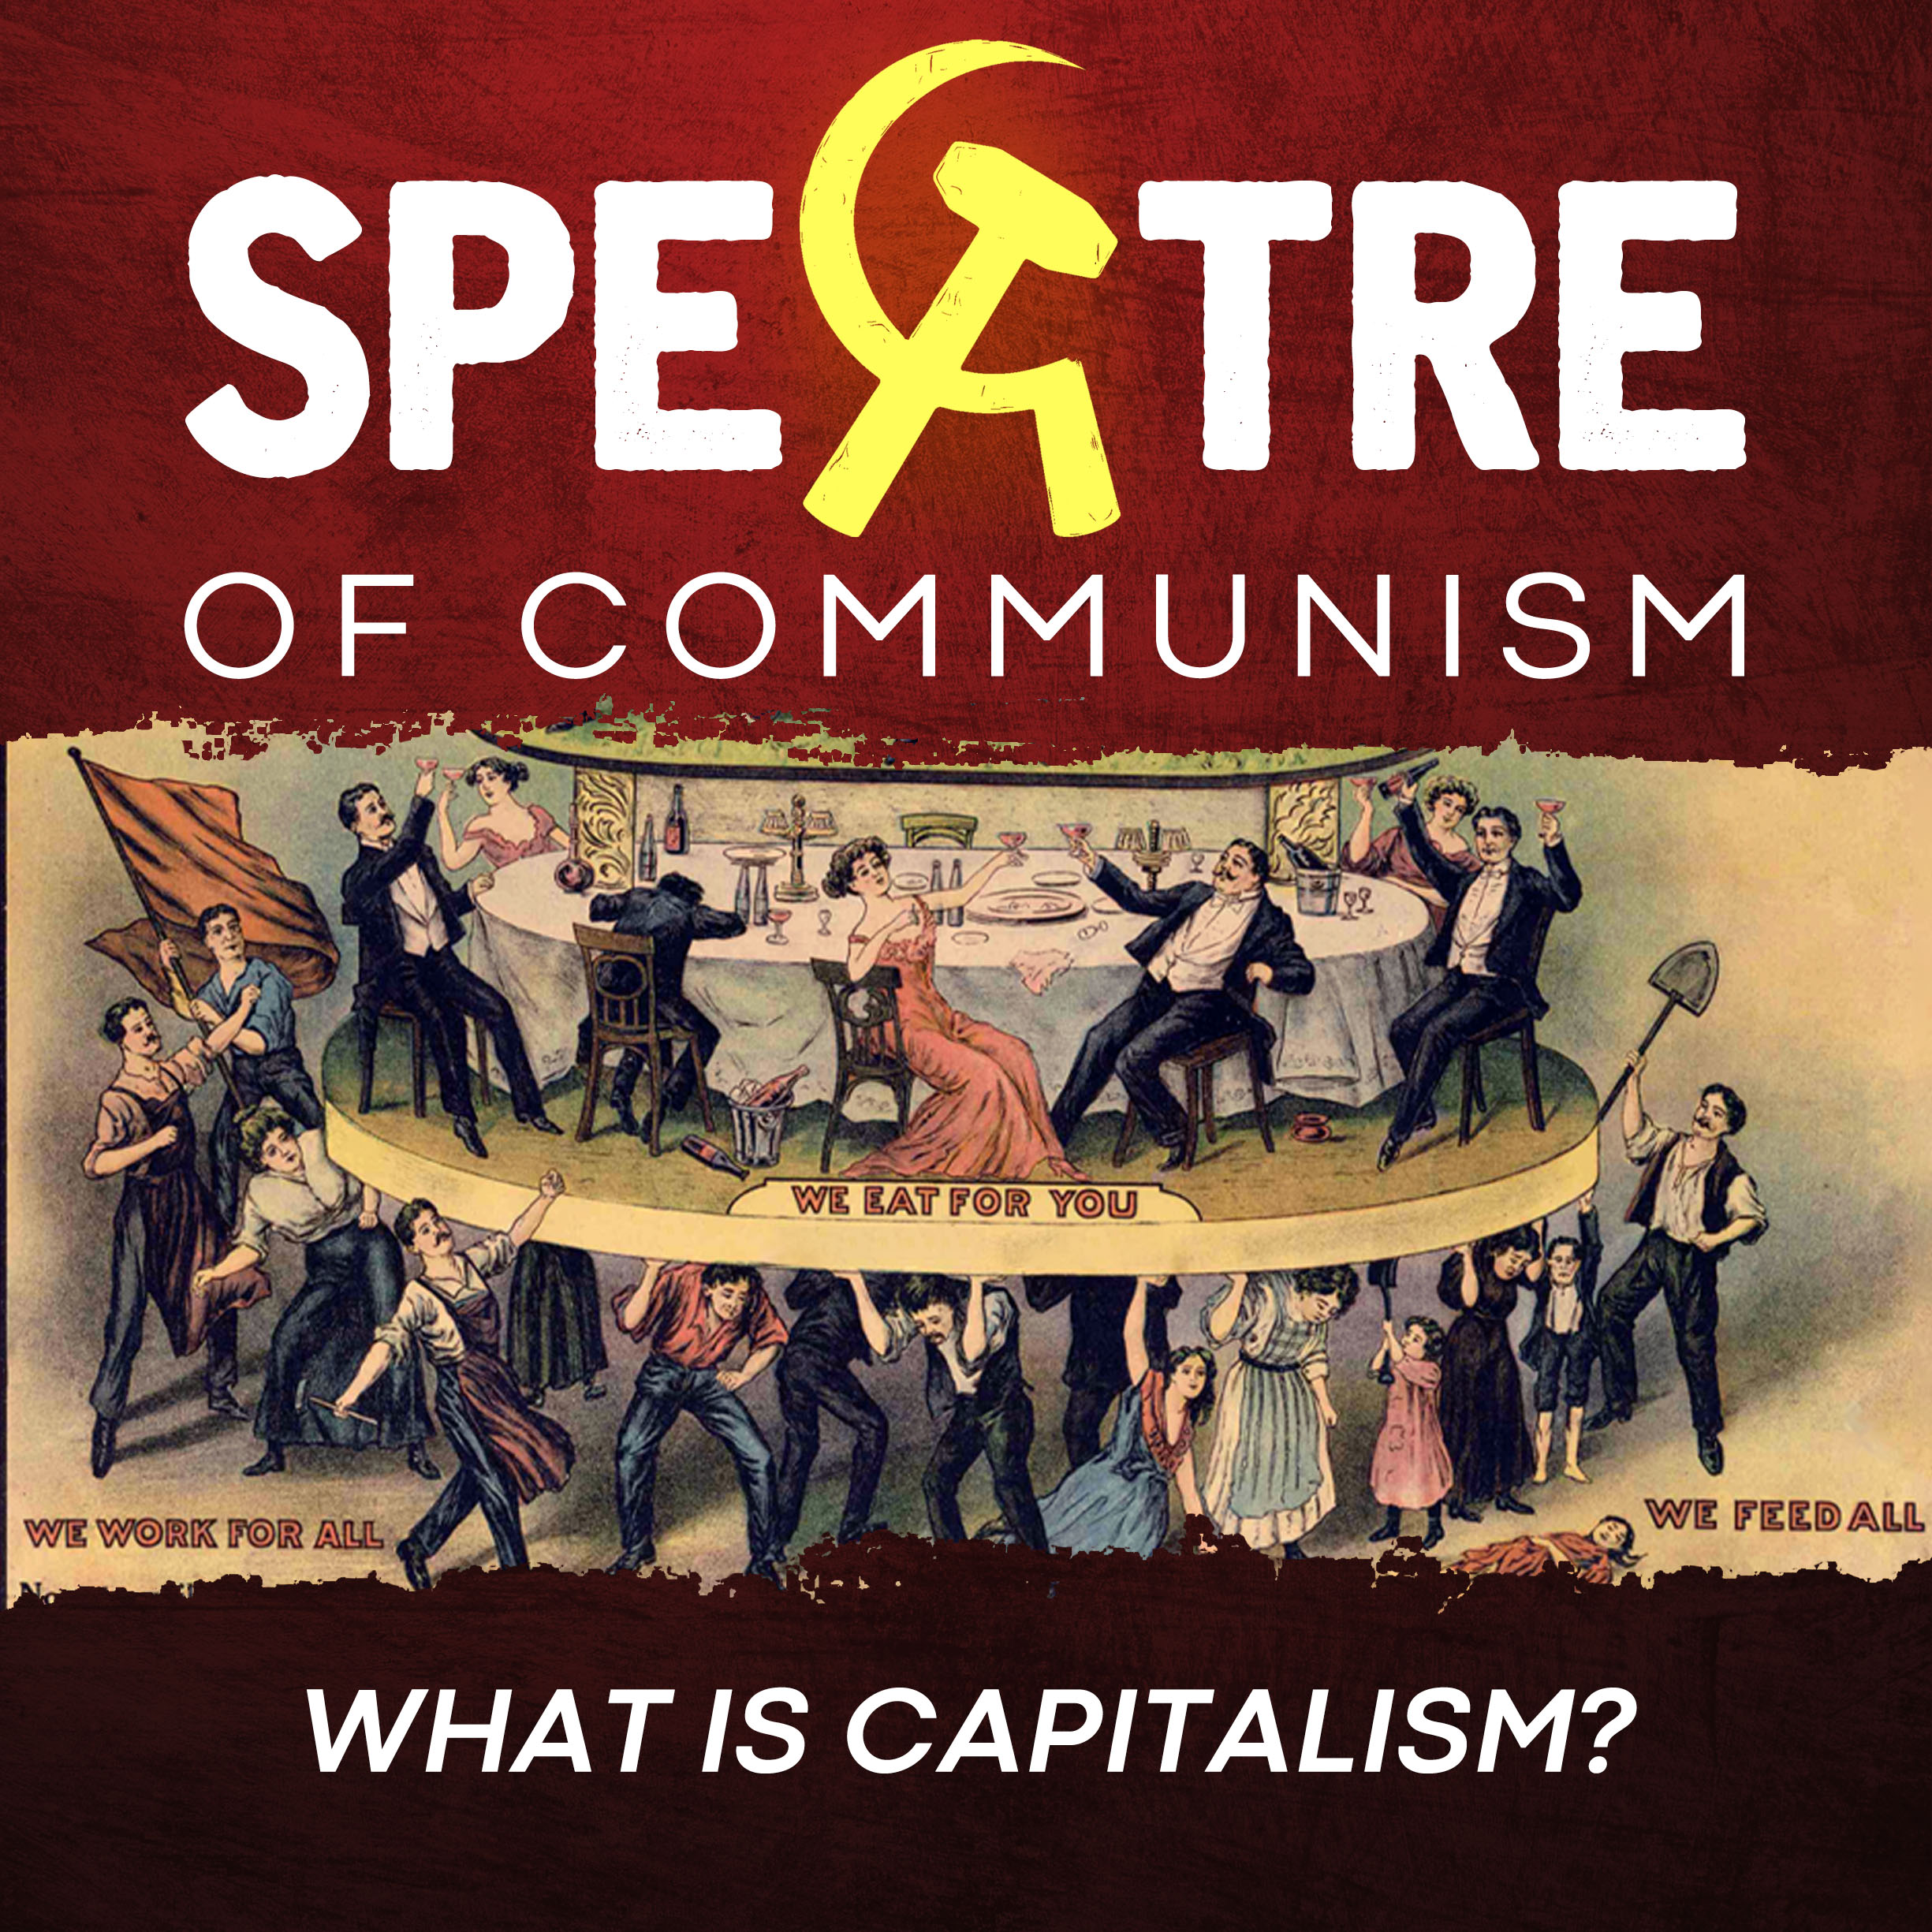 What is capitalism?